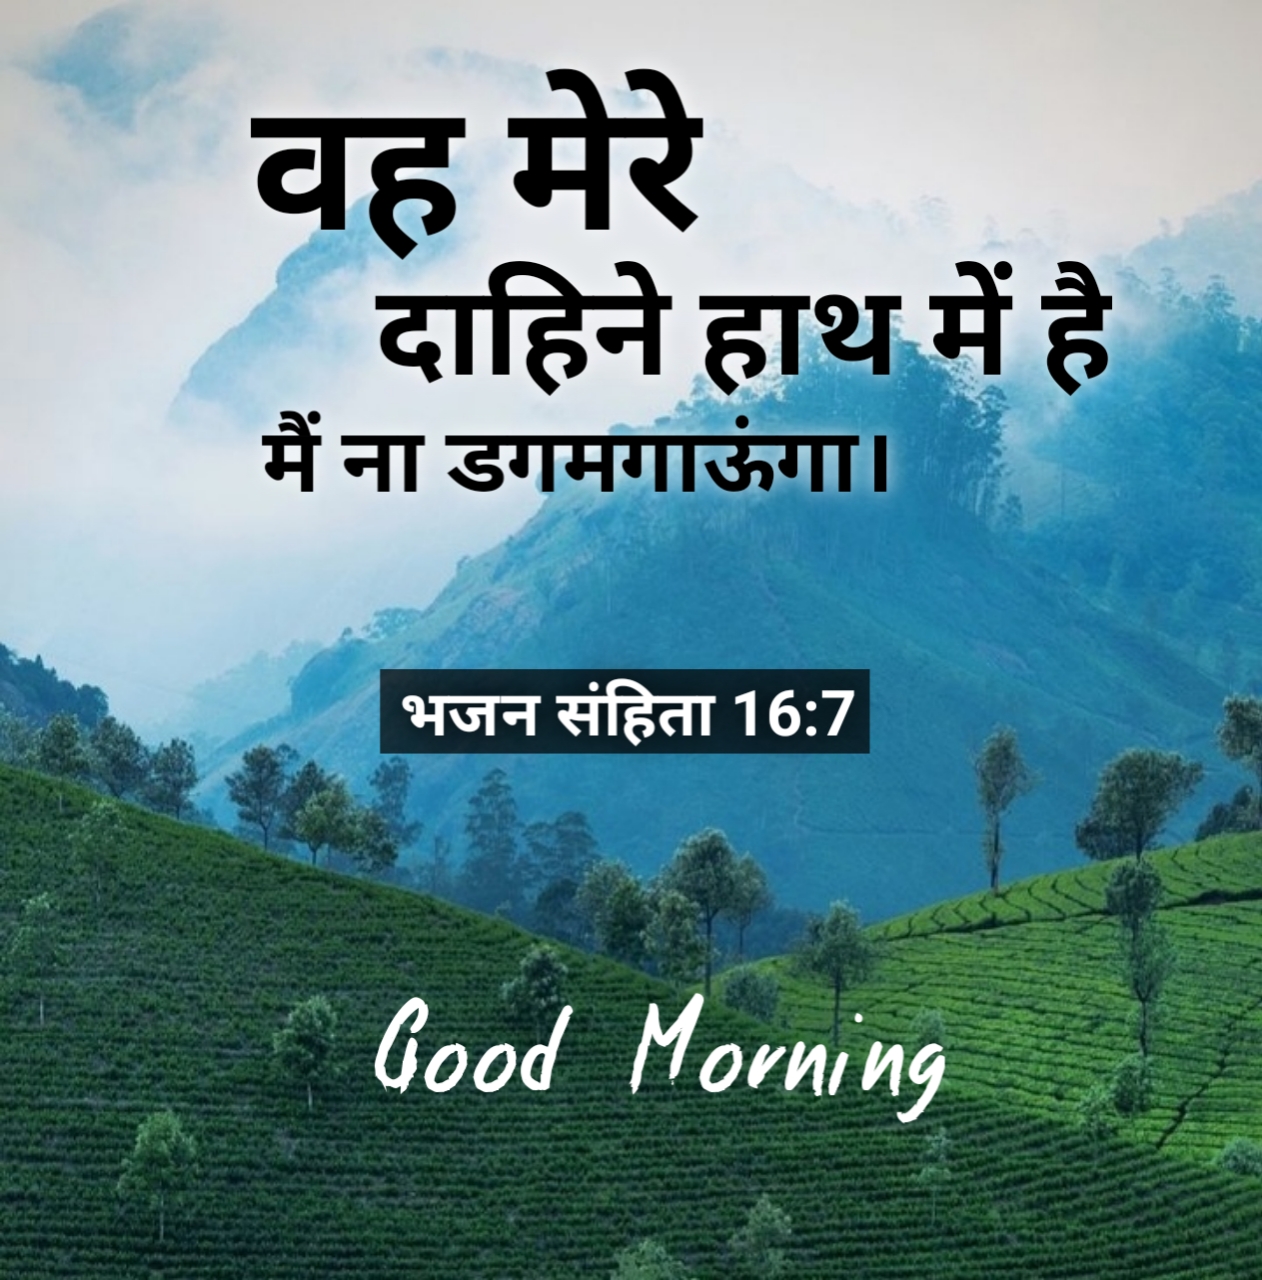 Good morning bible verse quotes images in hindi